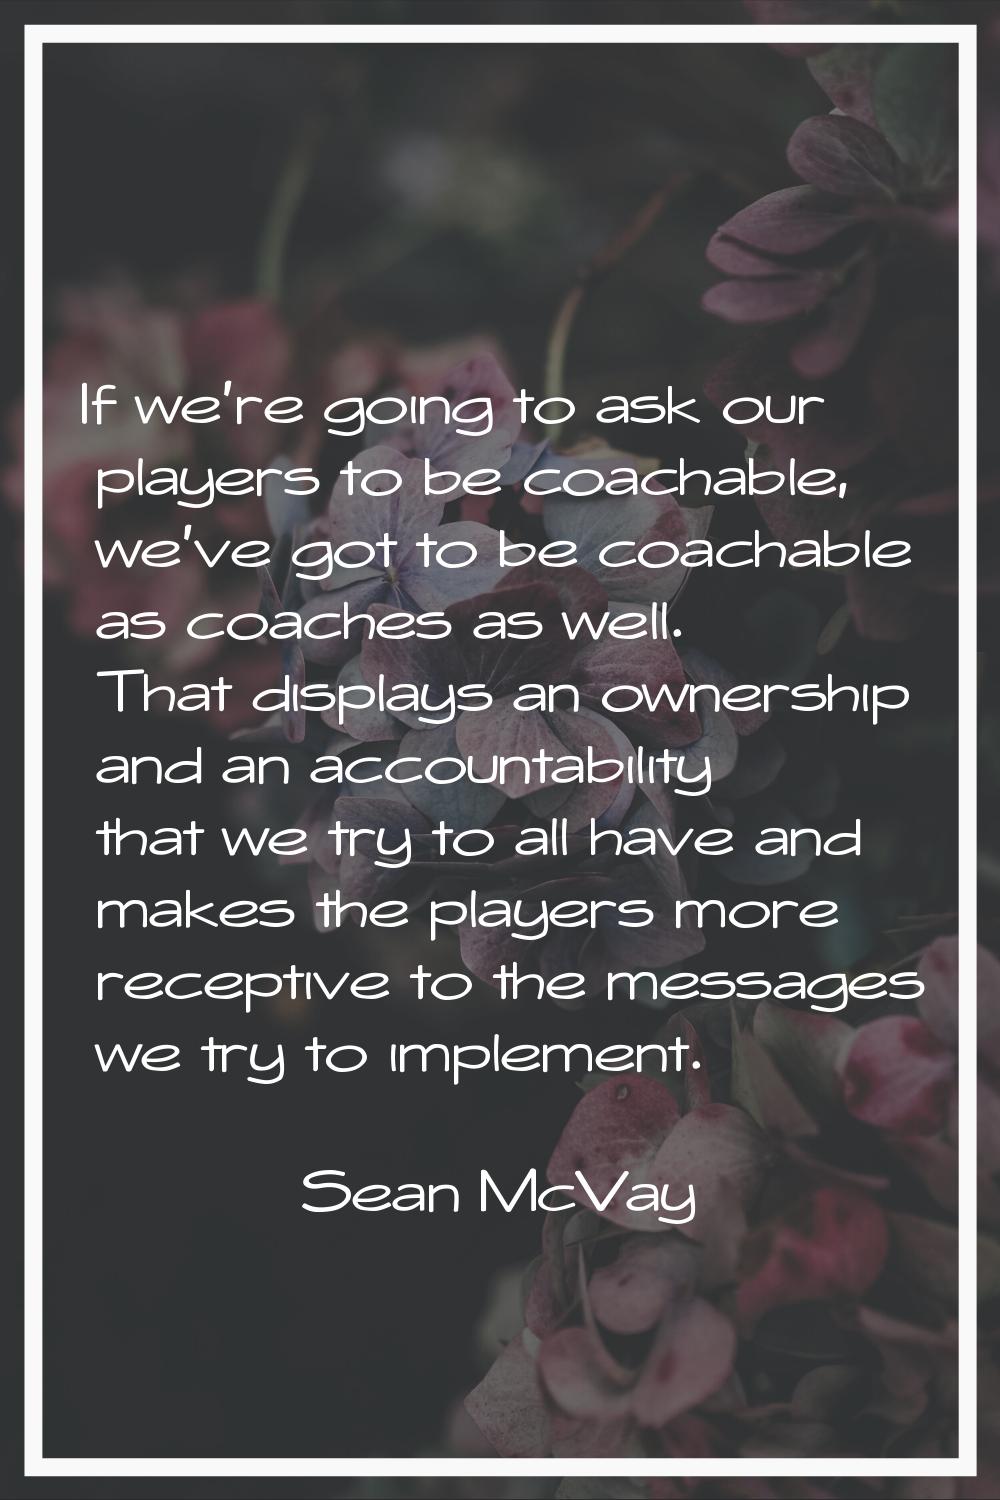 If we're going to ask our players to be coachable, we've got to be coachable as coaches as well. Th